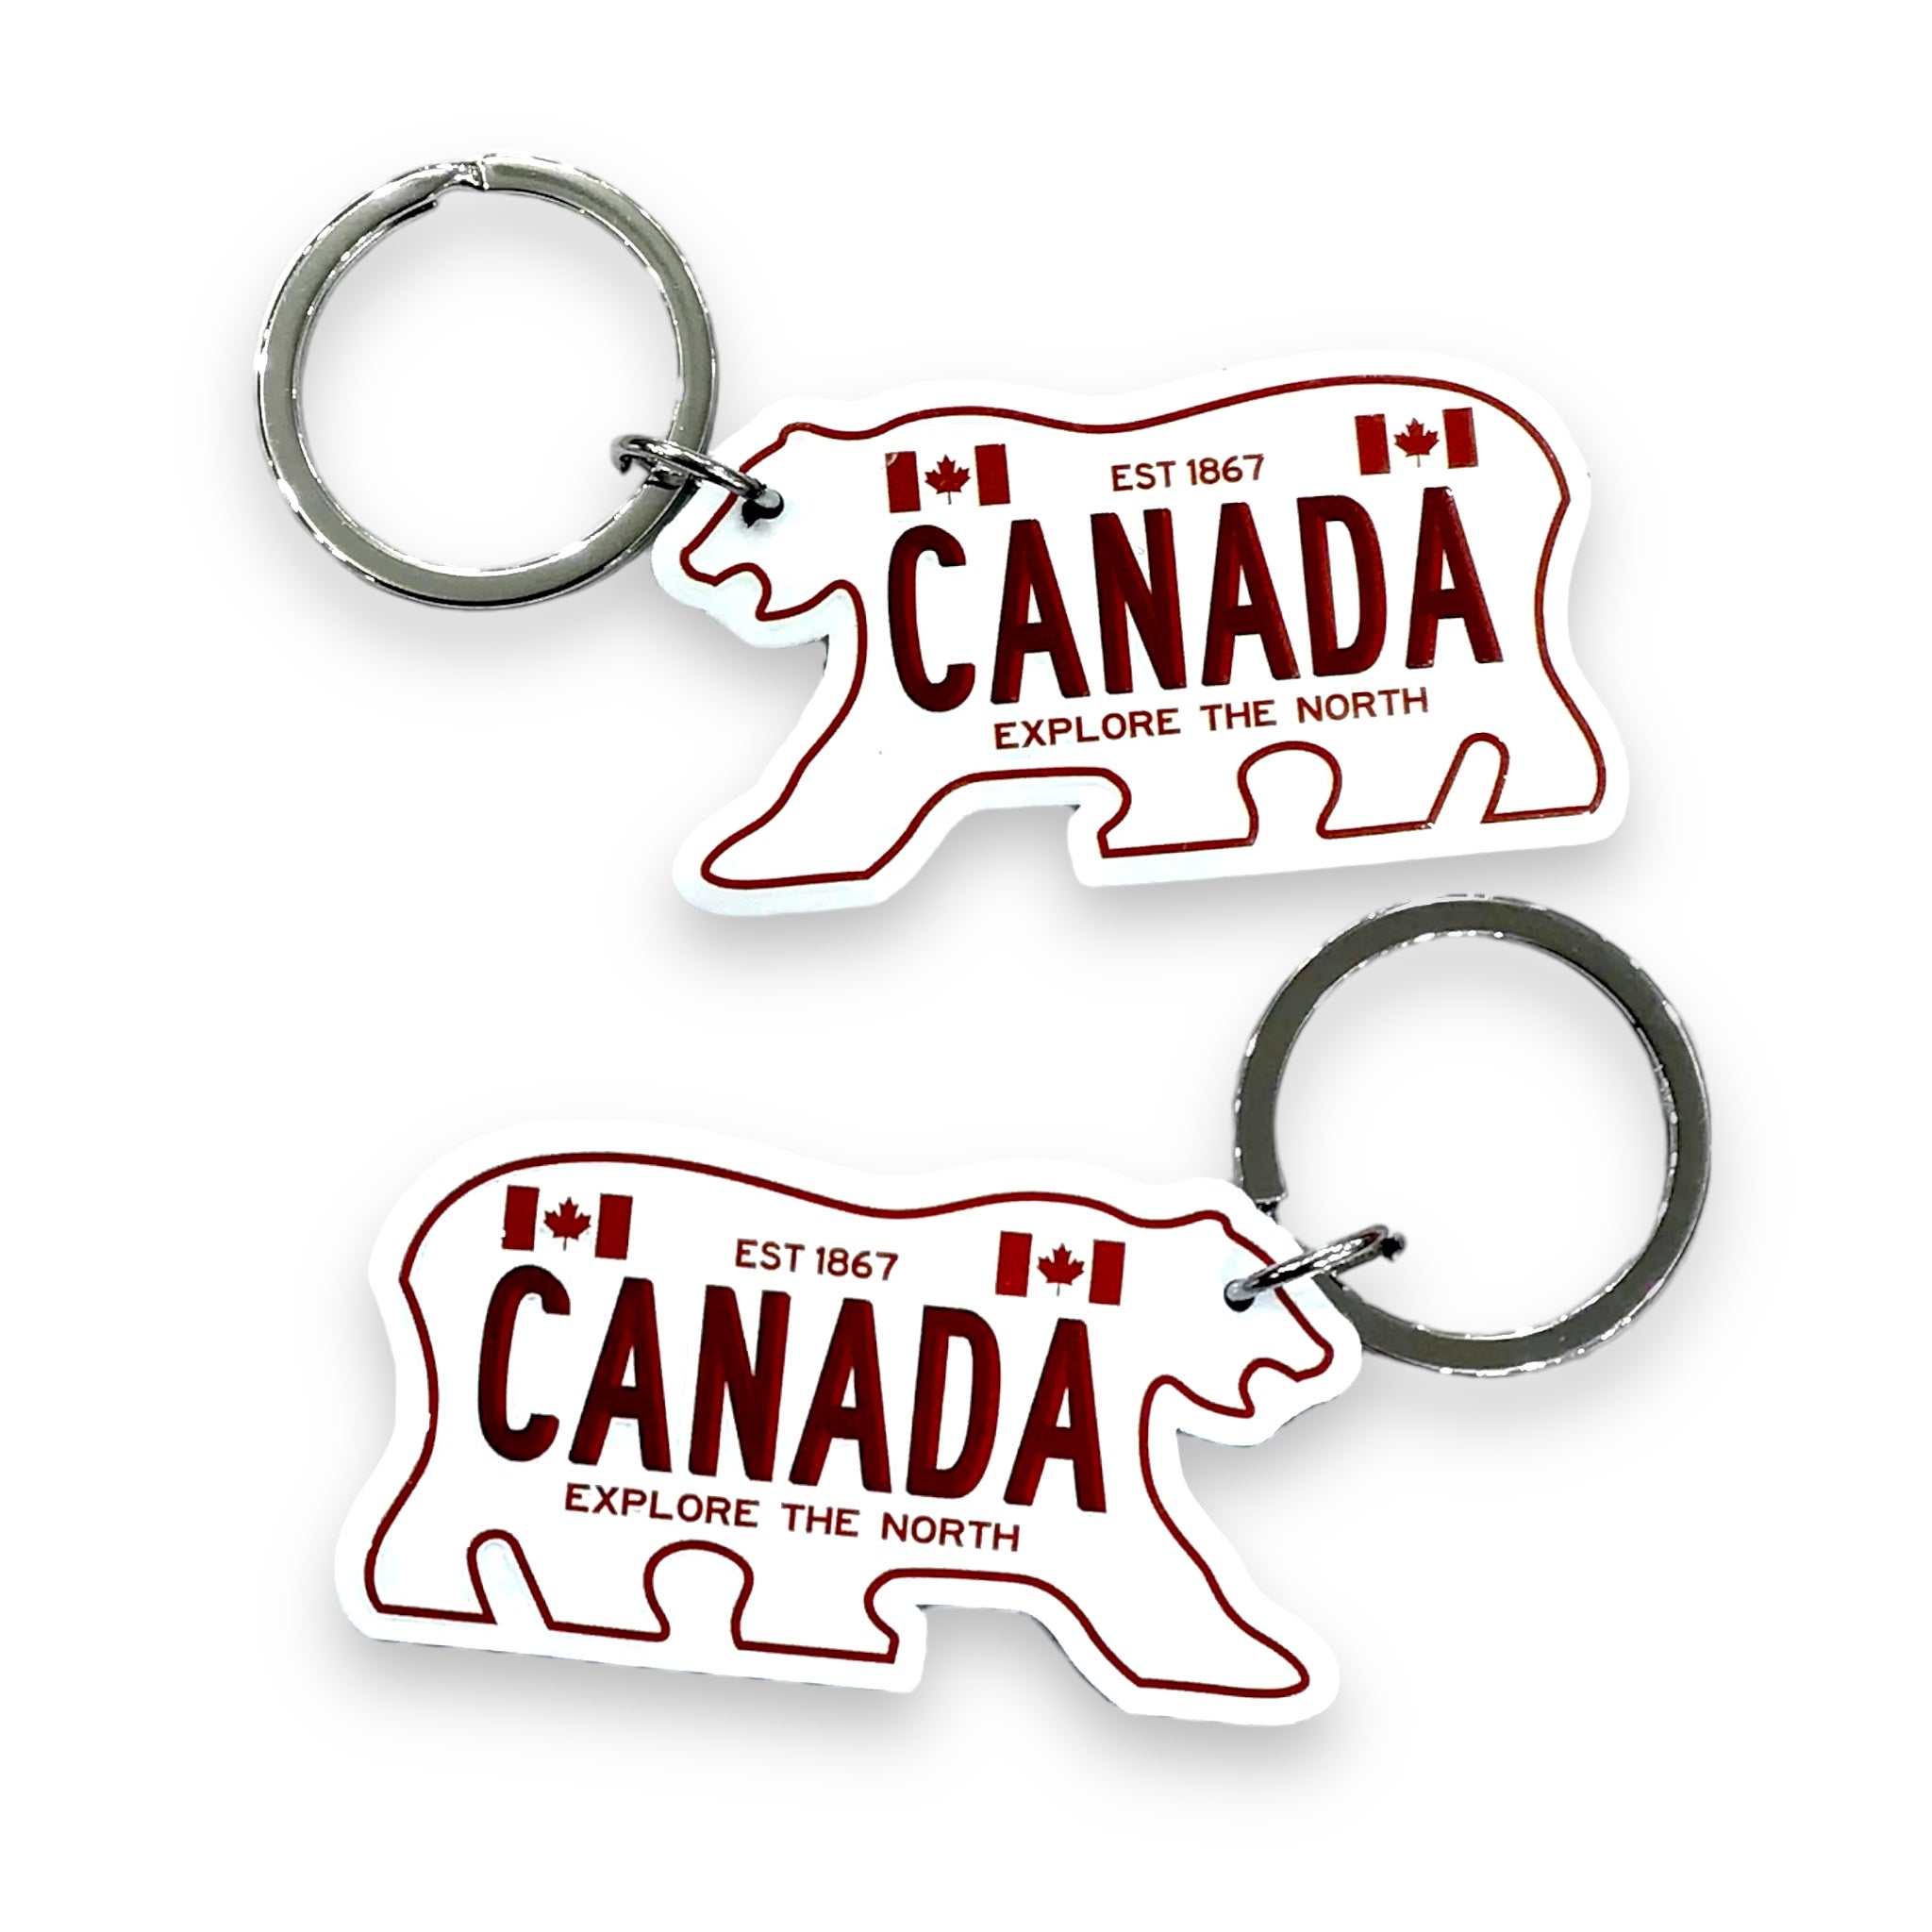 Canada Keychain Double Sided - Explore The North Key Ring Bear Cut Shaped